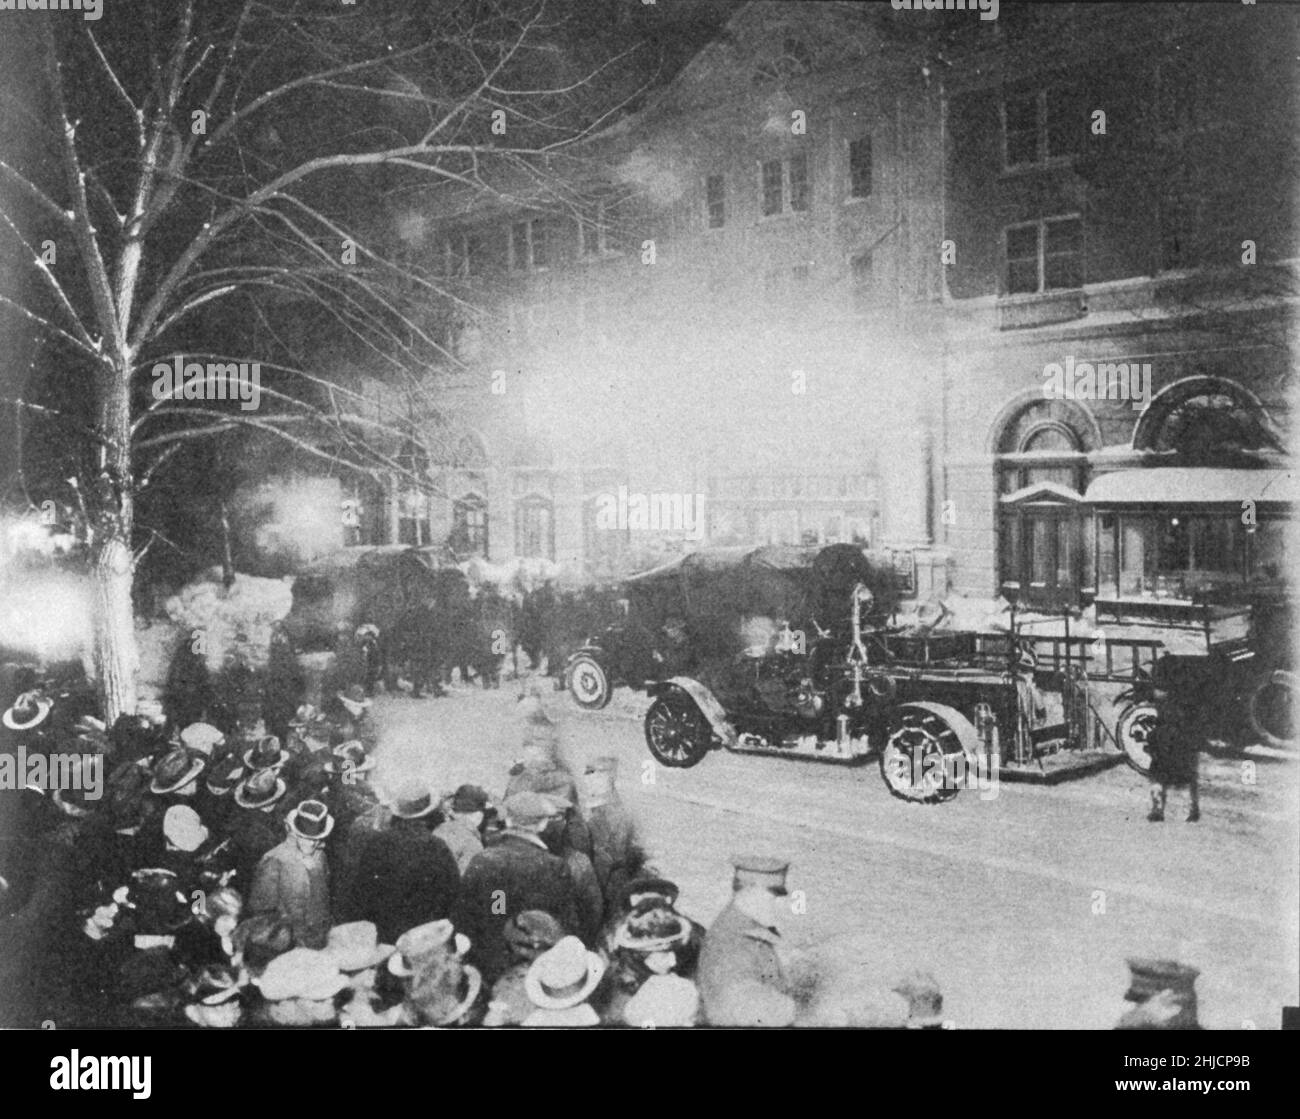 In front of the Knickerbocker Theater immediately after it collapsed. Handwritten note below indicates that it was probably the following night. 96 were killed and 125 injured in the collapse of the theater. One other man froze to death in the storm. Washington, D. C. January 27, 28, 1922. Stock Photo